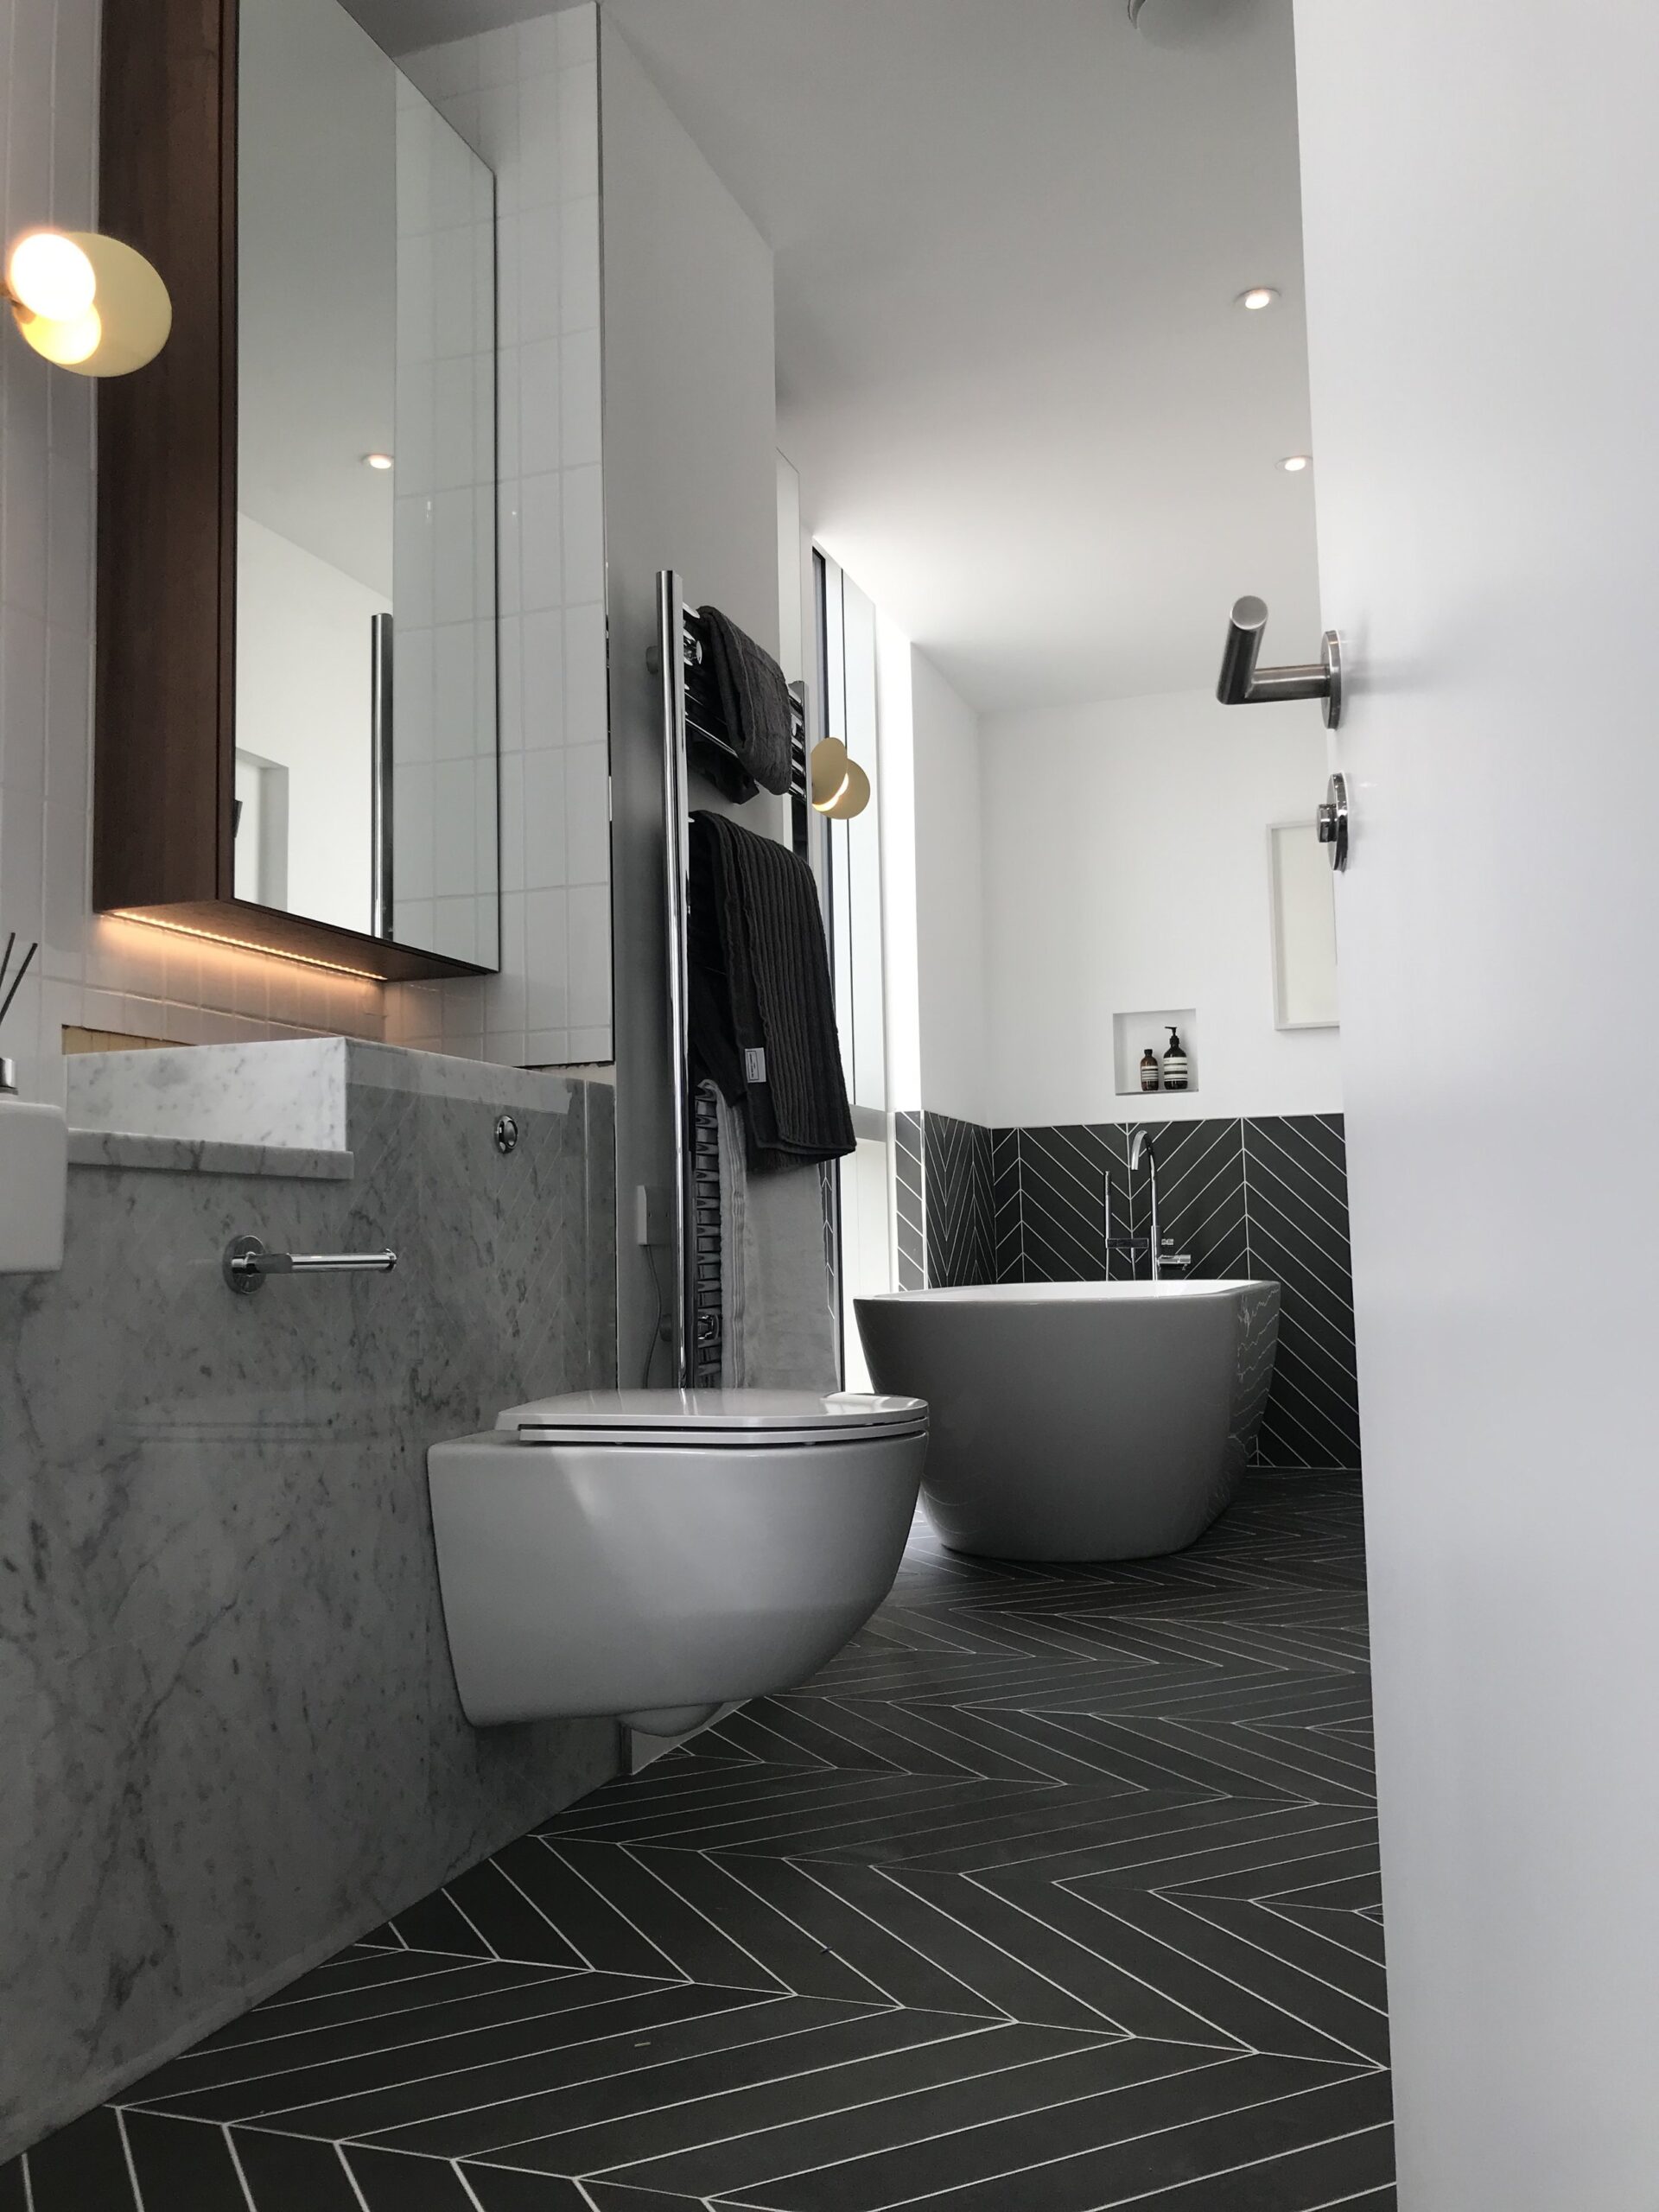 Low angle of bathroom showing toilet and freestanding bath